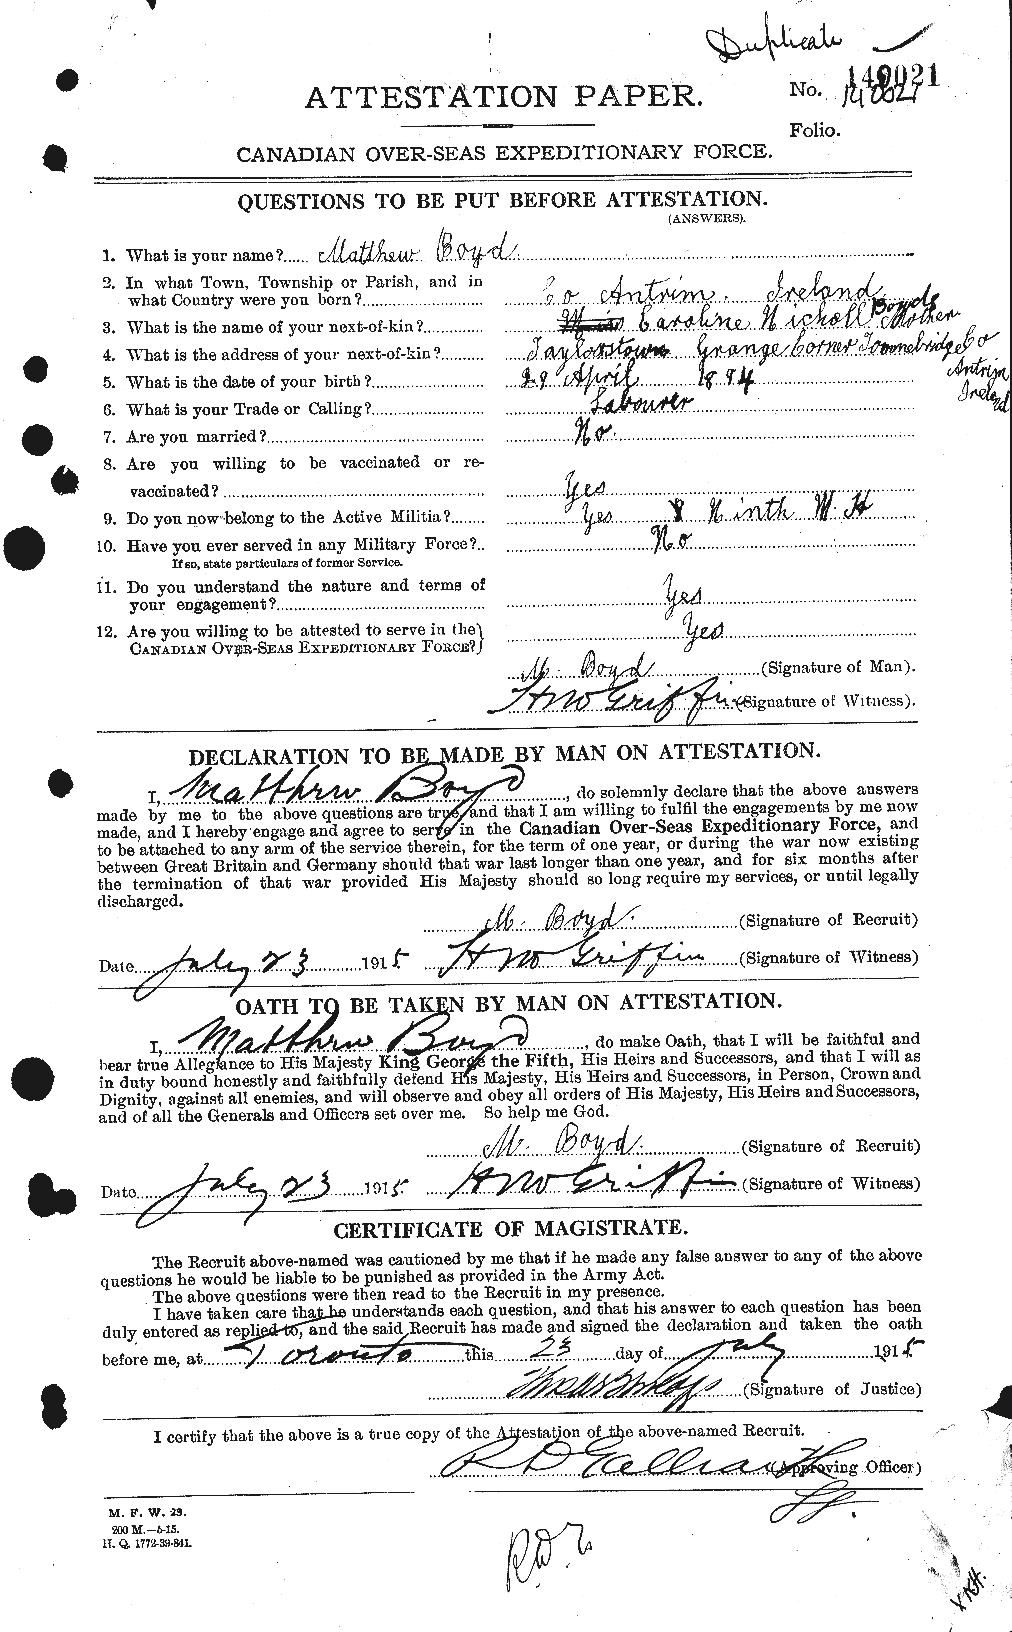 Personnel Records of the First World War - CEF 257046a